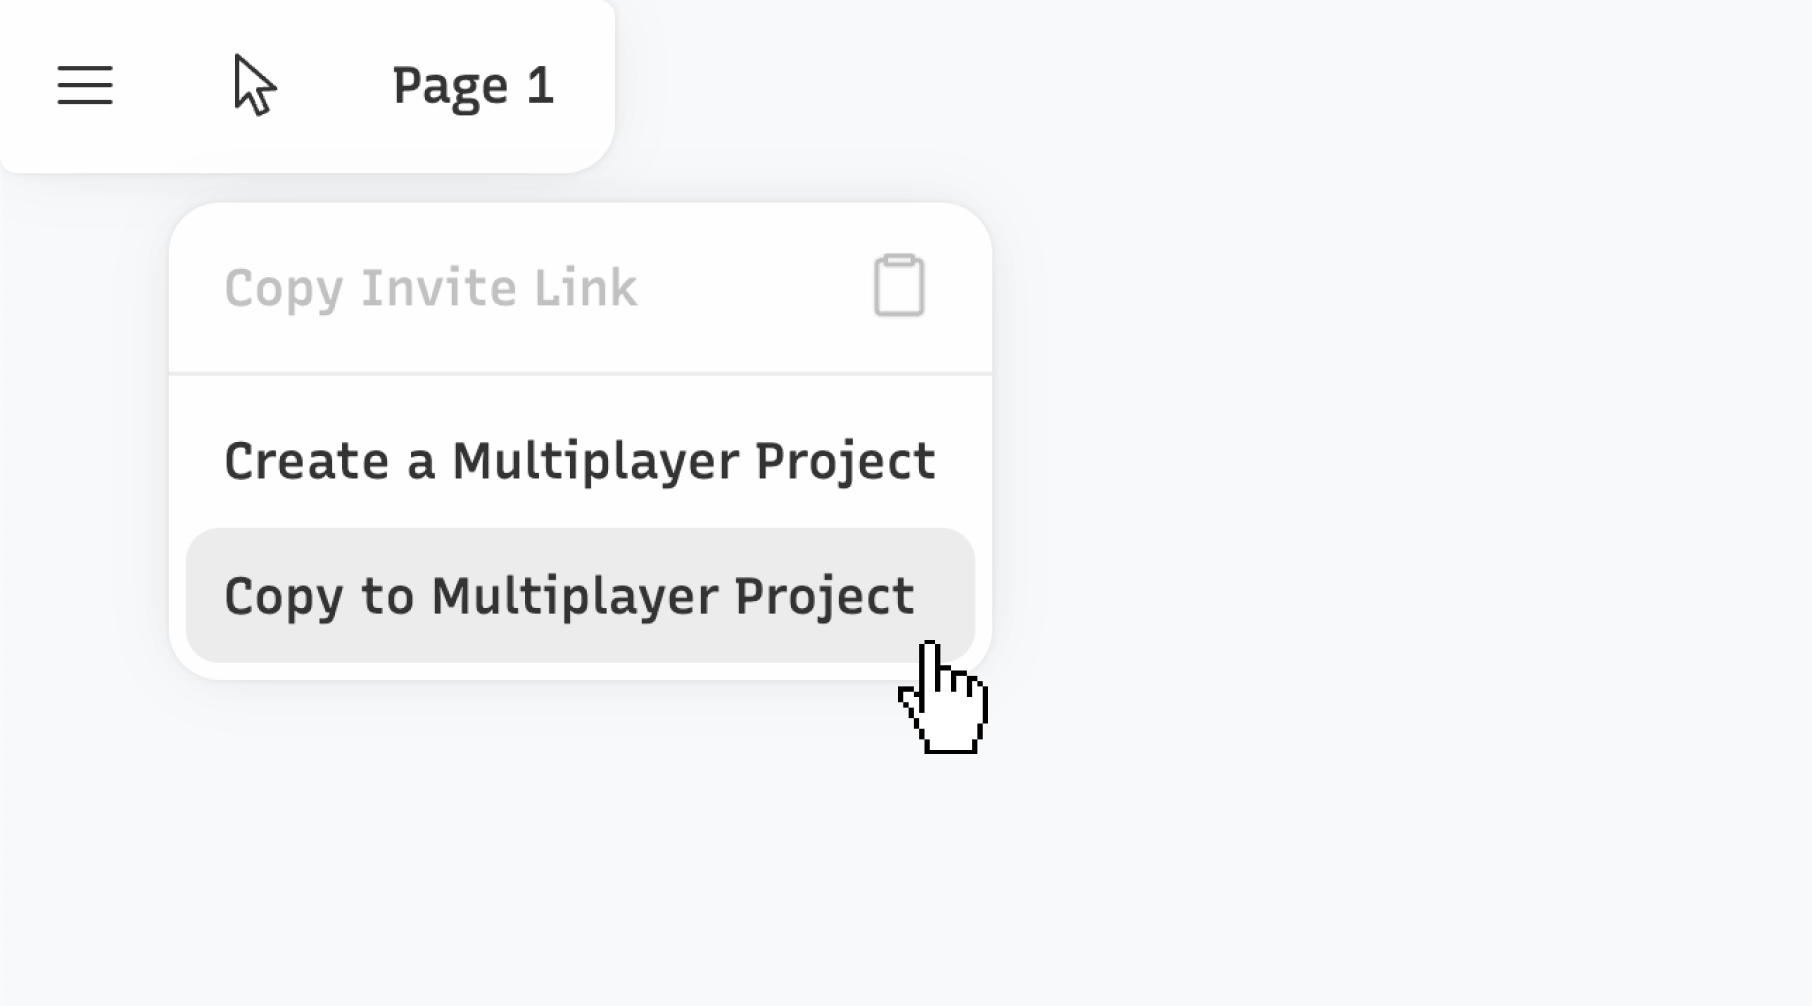 Copy to Multiplayer Project